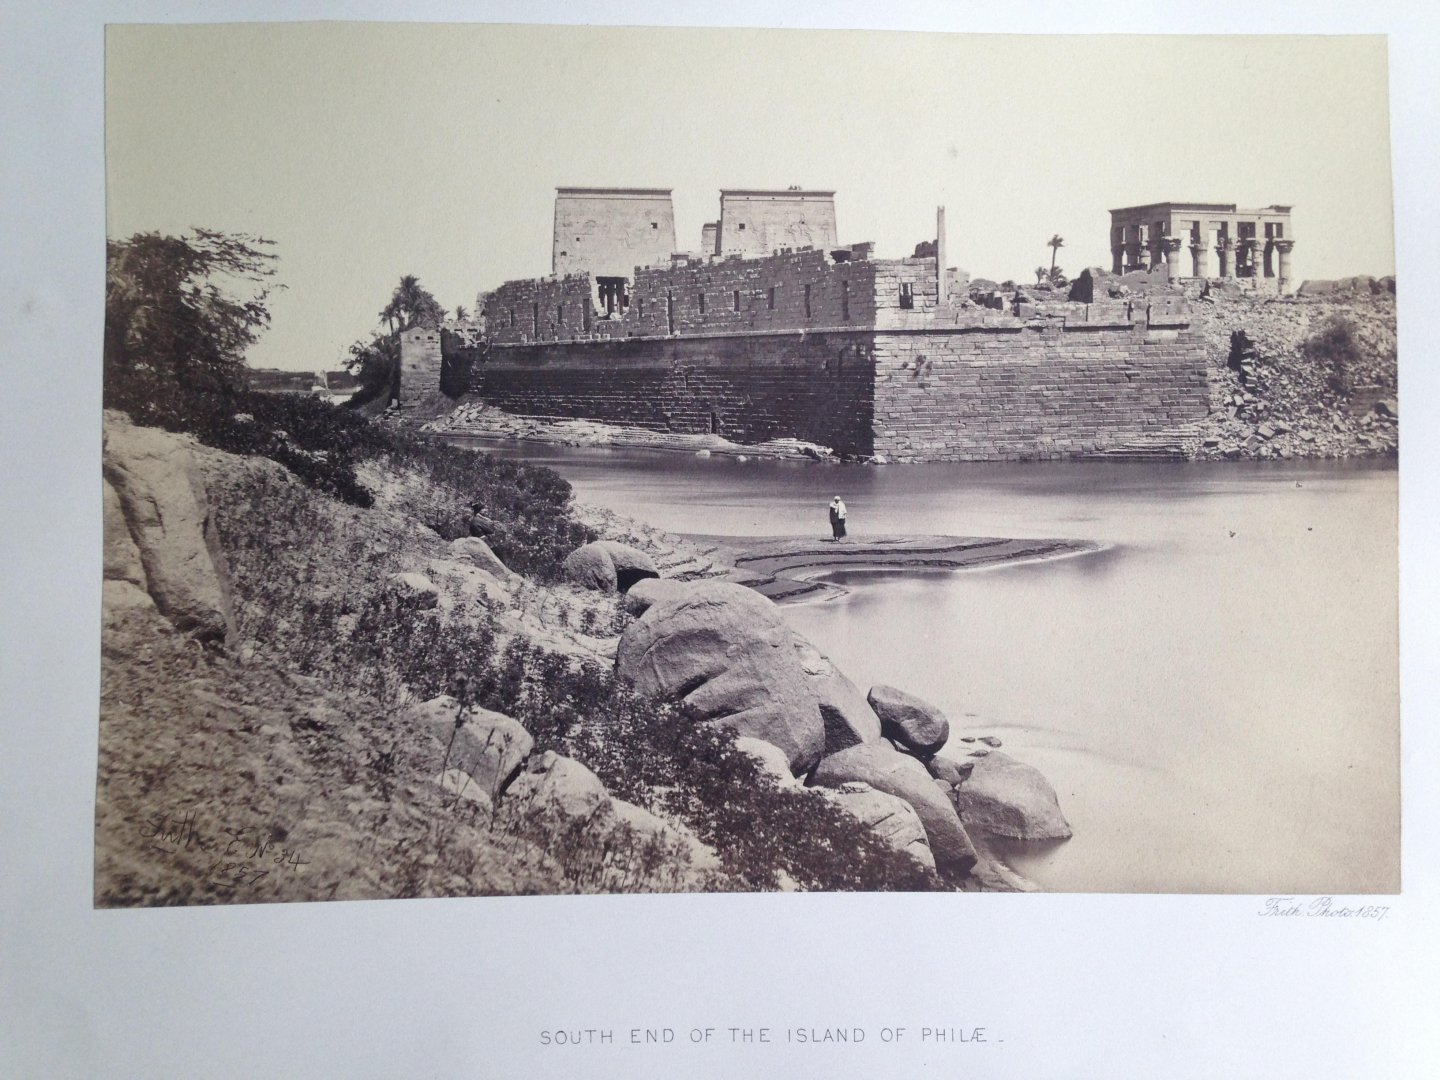 Frith, Francis - South End of the Island of Philae, Series Egypt and Palestine